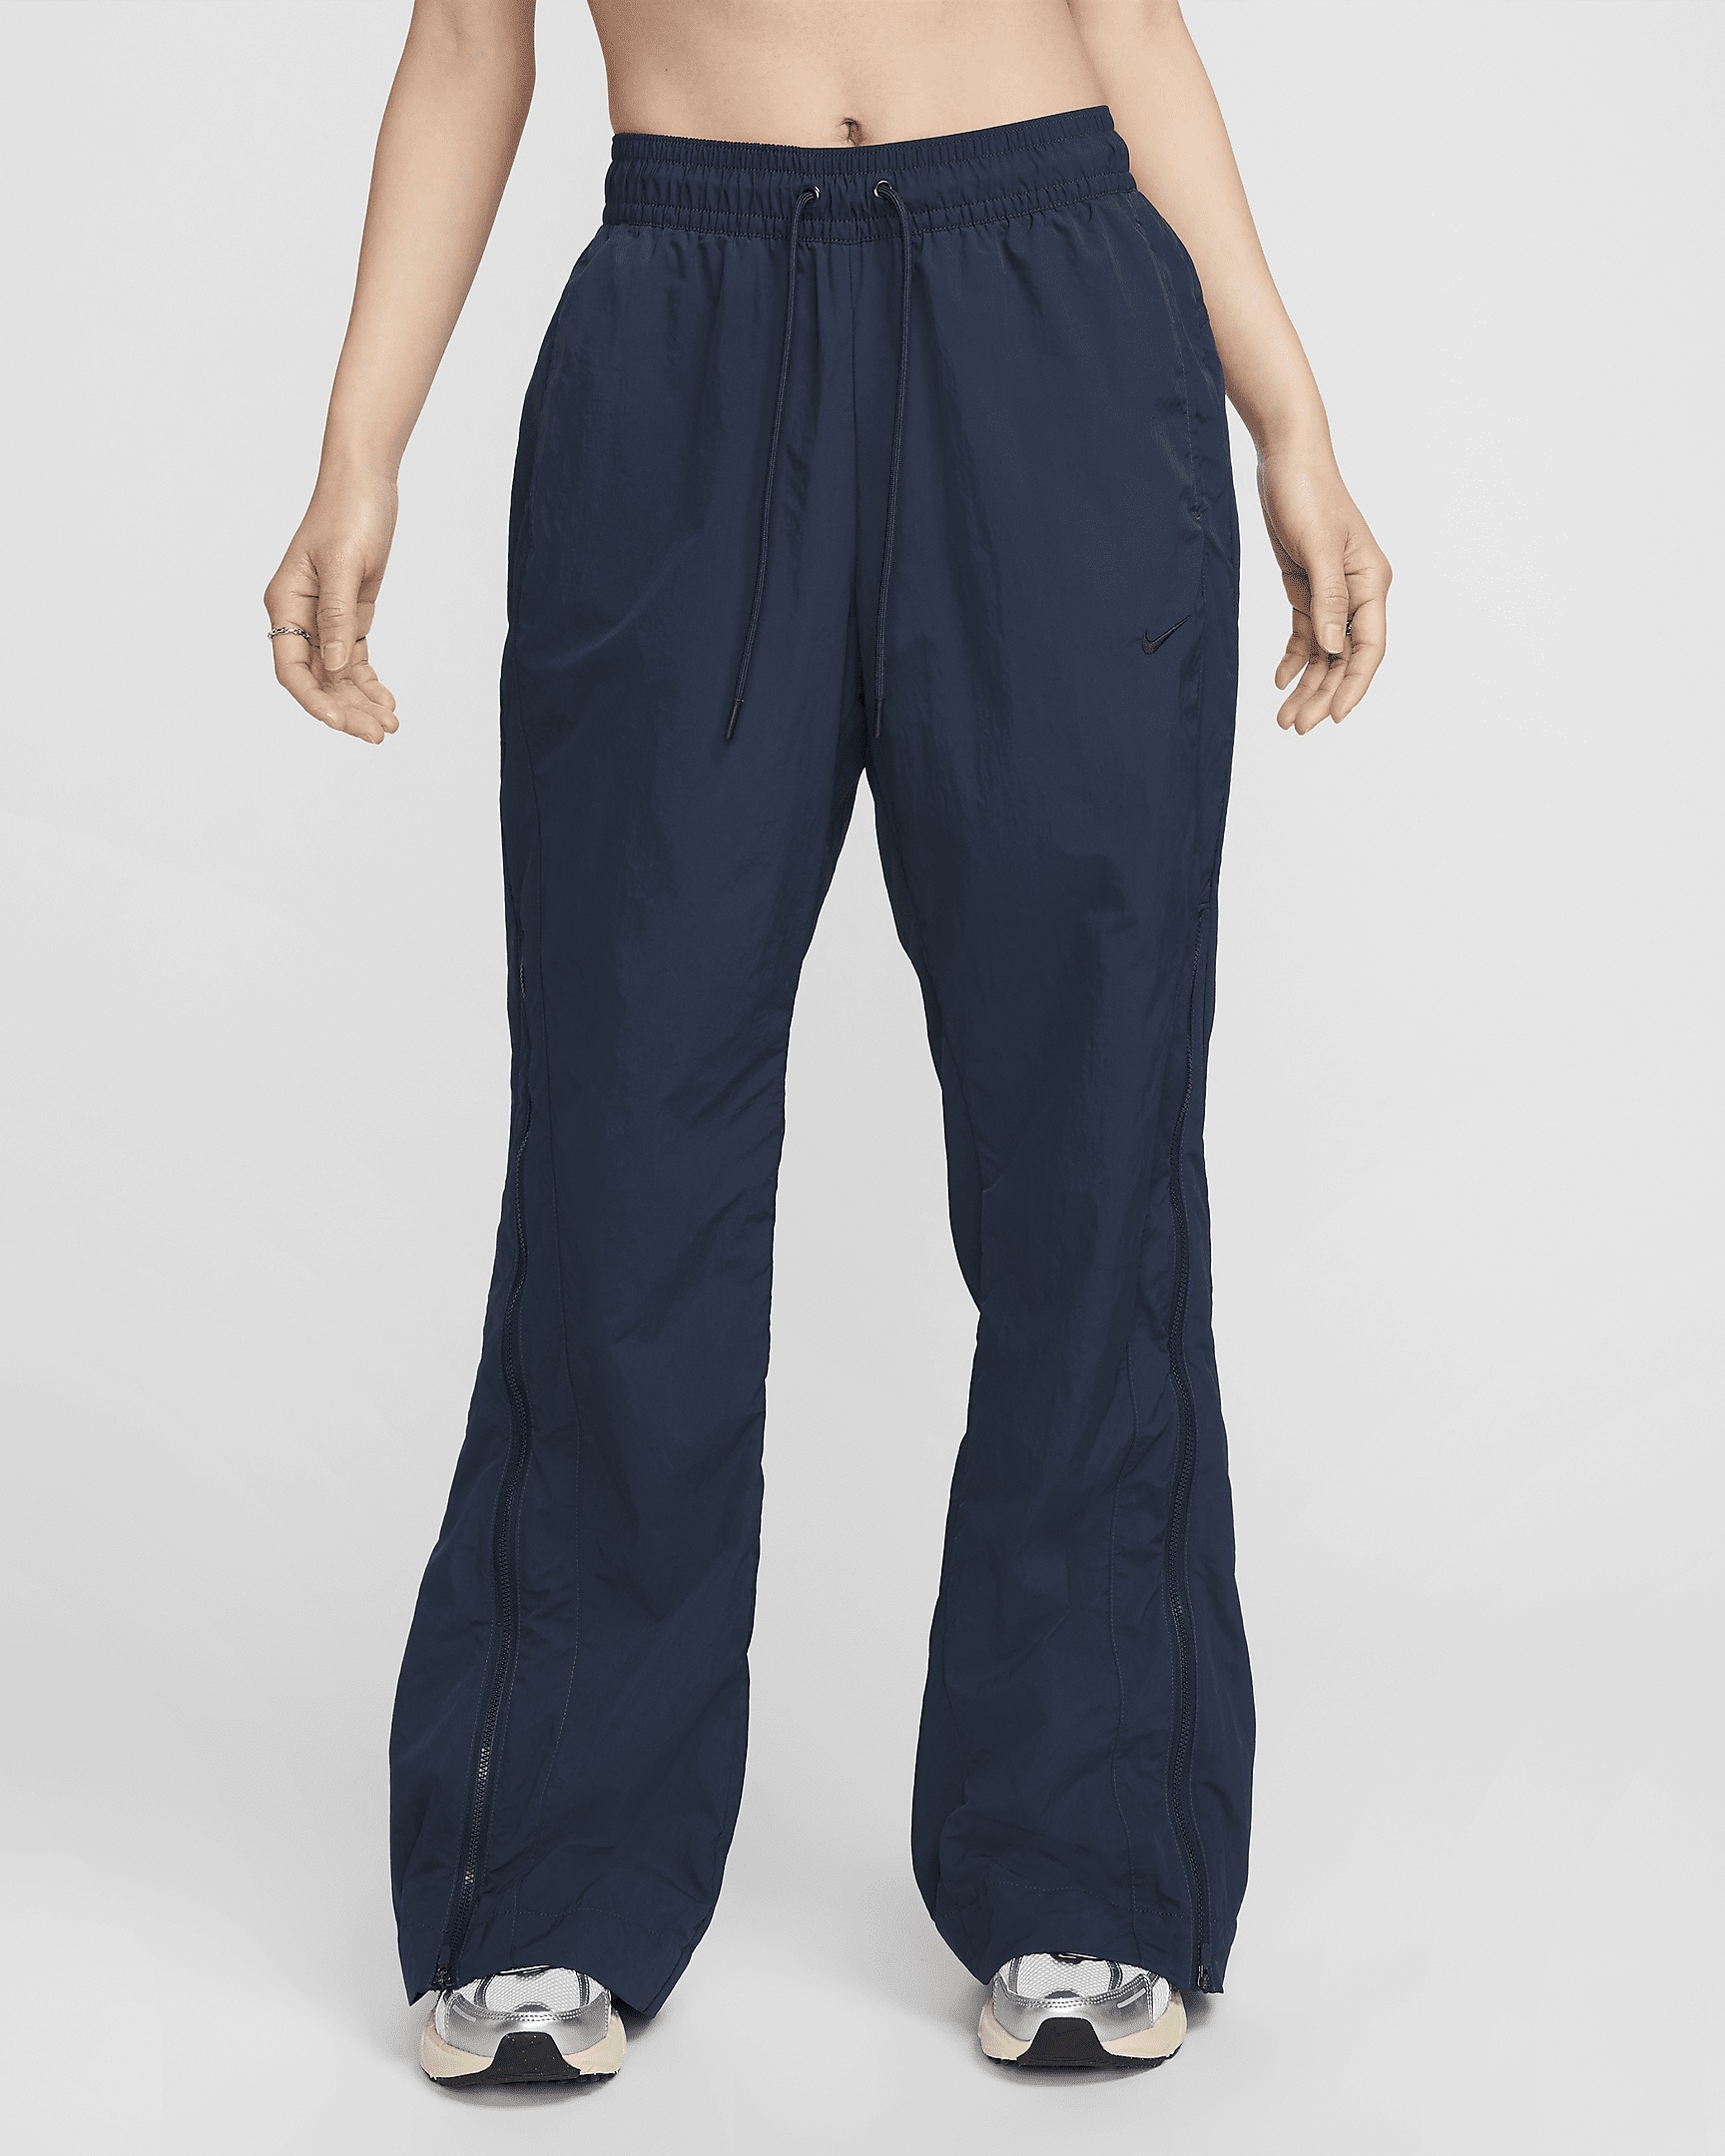 Women's Nike Sportswear Collection Mid-Rise Repel Zip Pants - 1